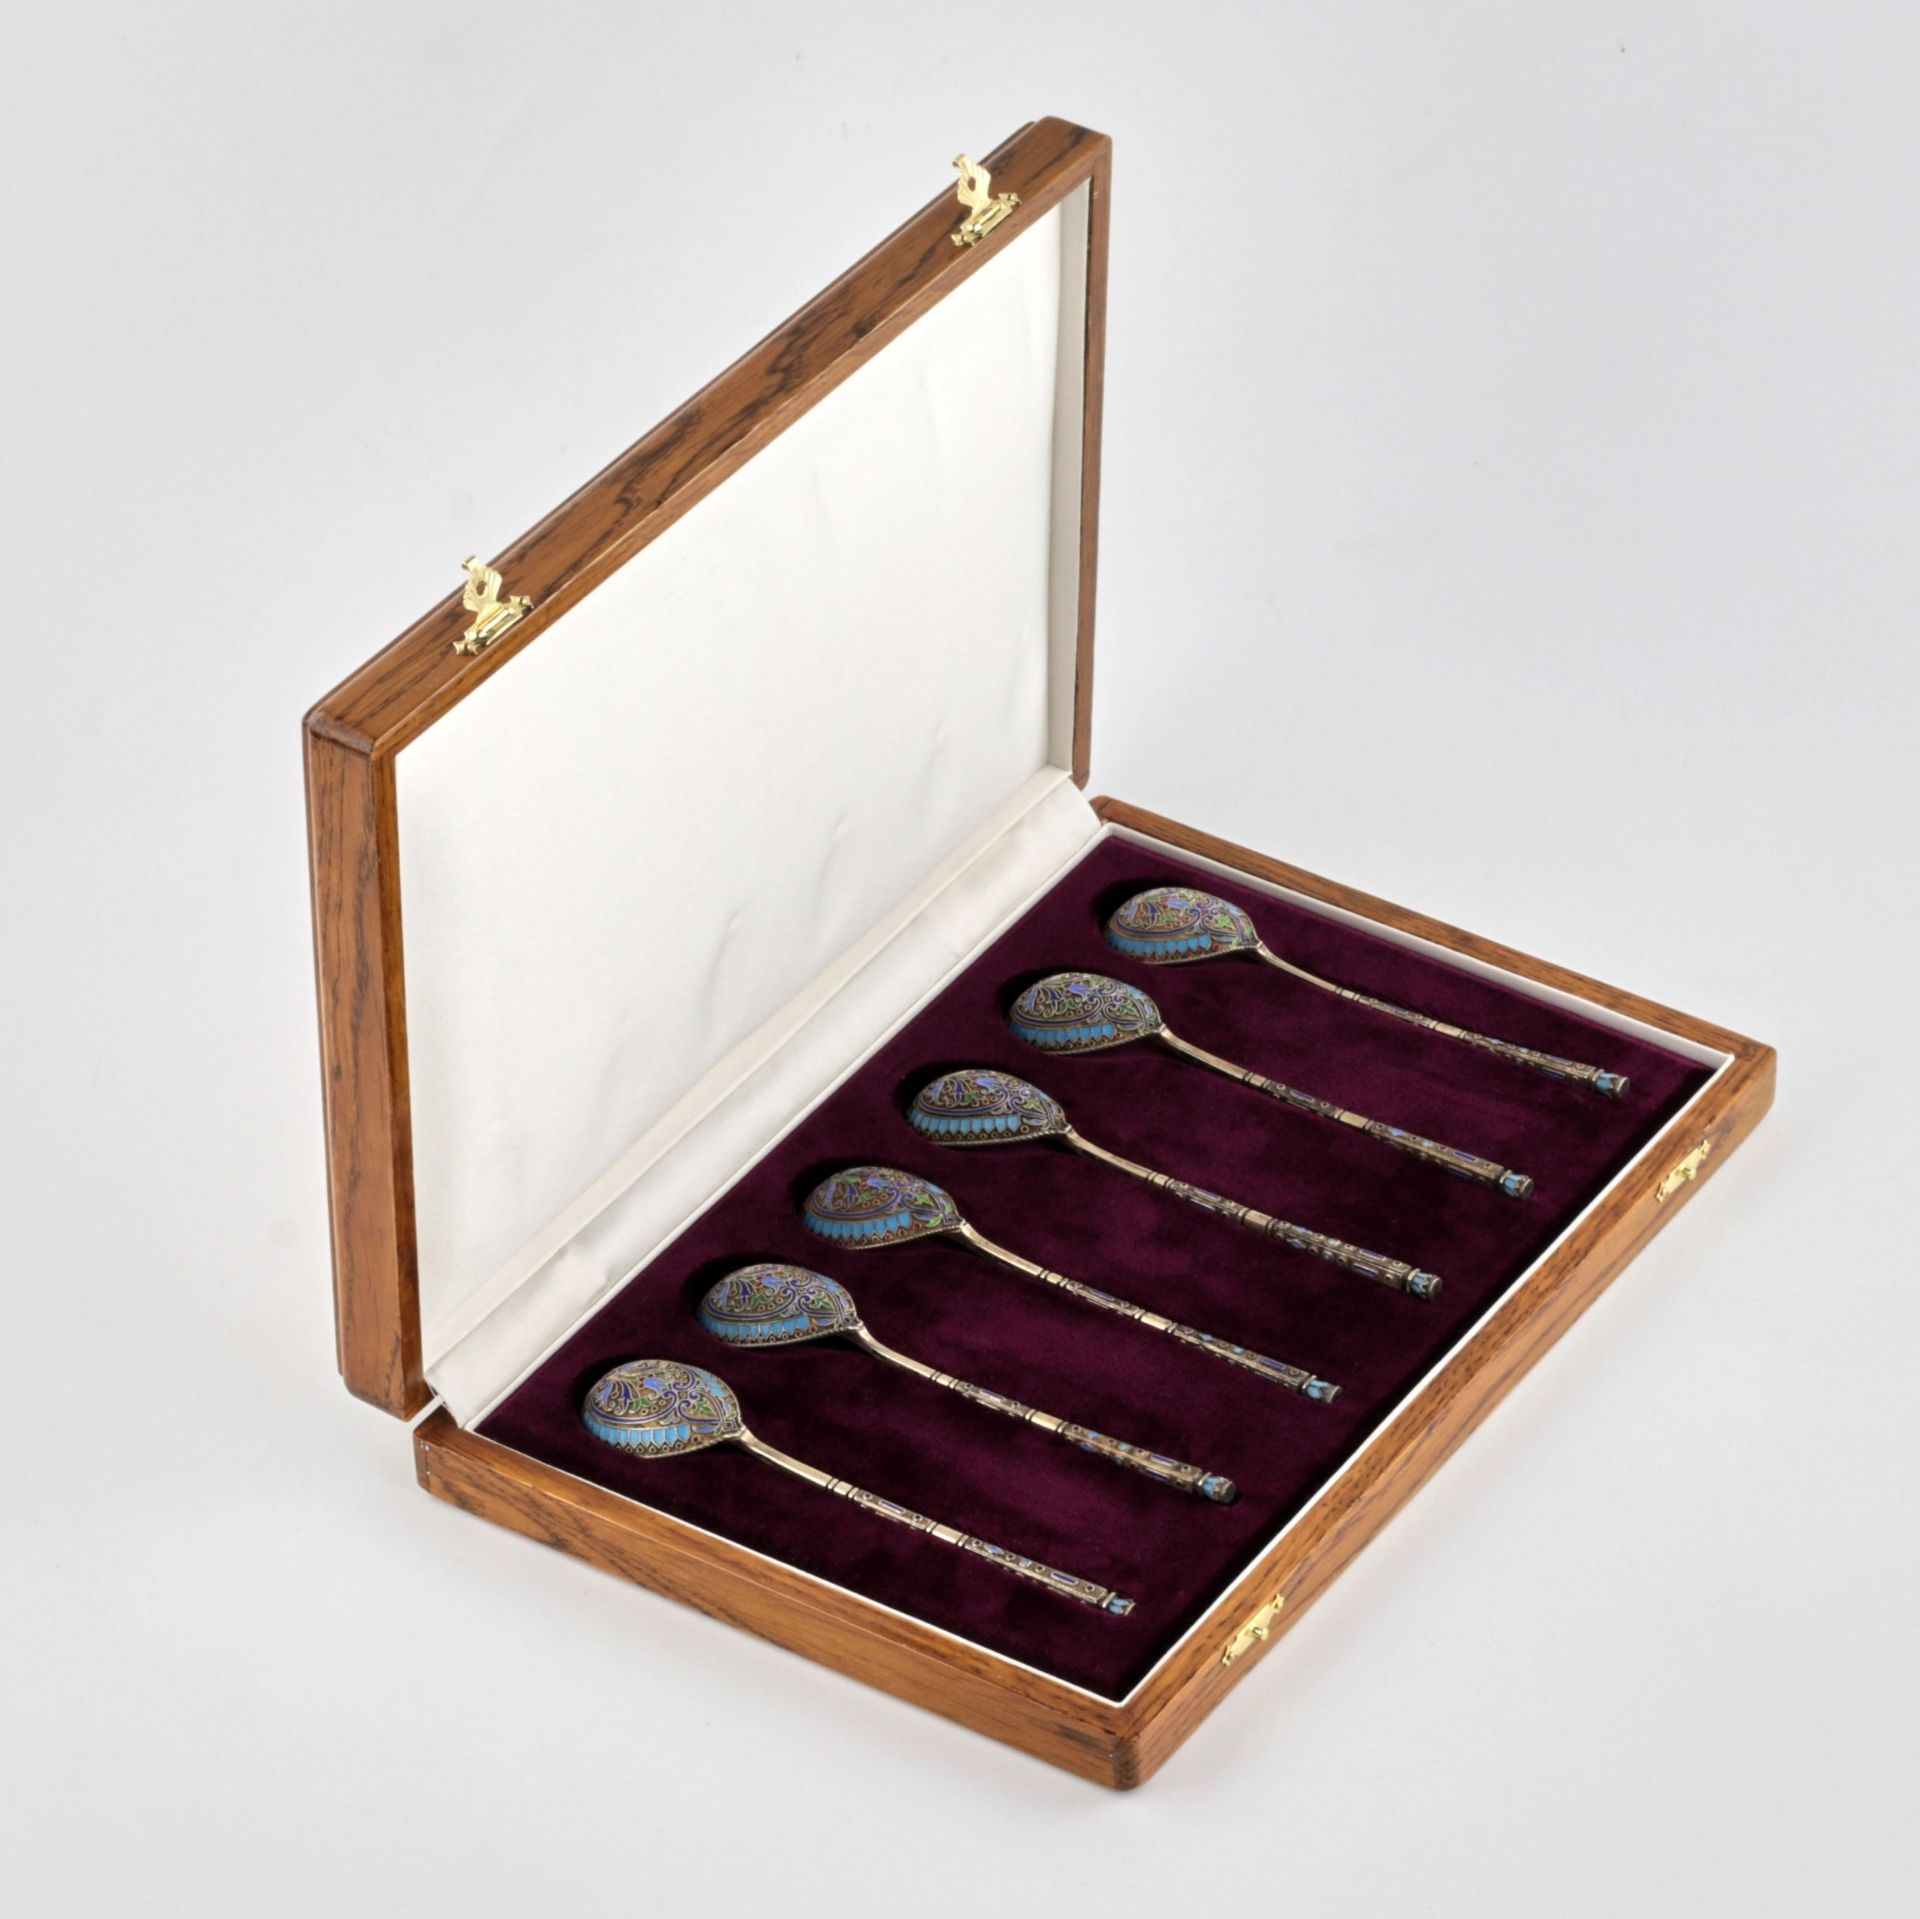 A set of Grachev`s teaspoons in their own case. - Image 8 of 9